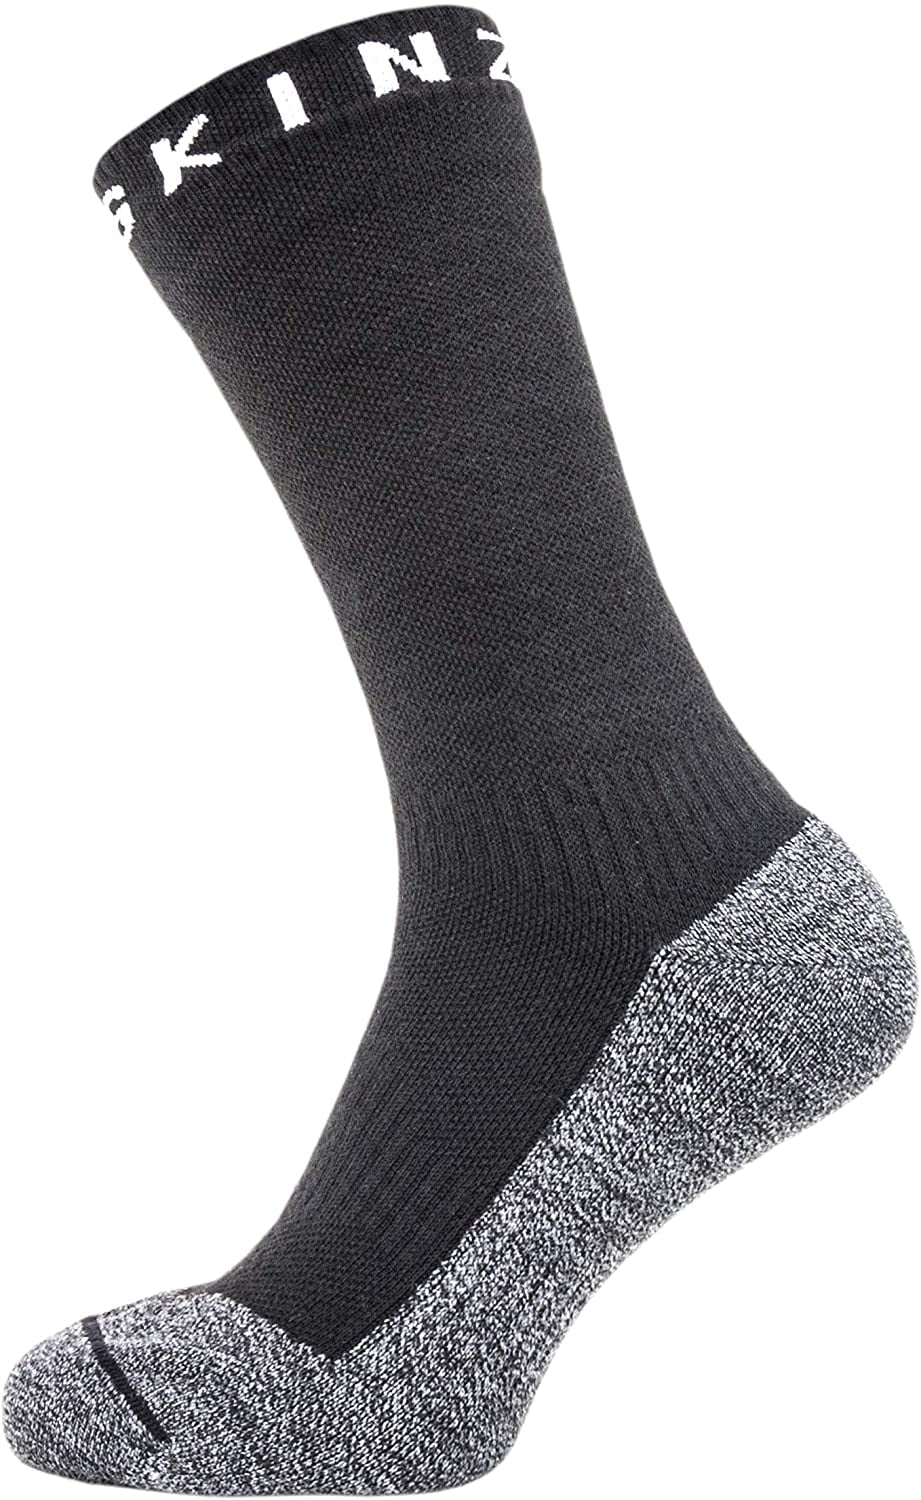 SealSkinz Unisex-Adults Soft Touch Mid Length Socks